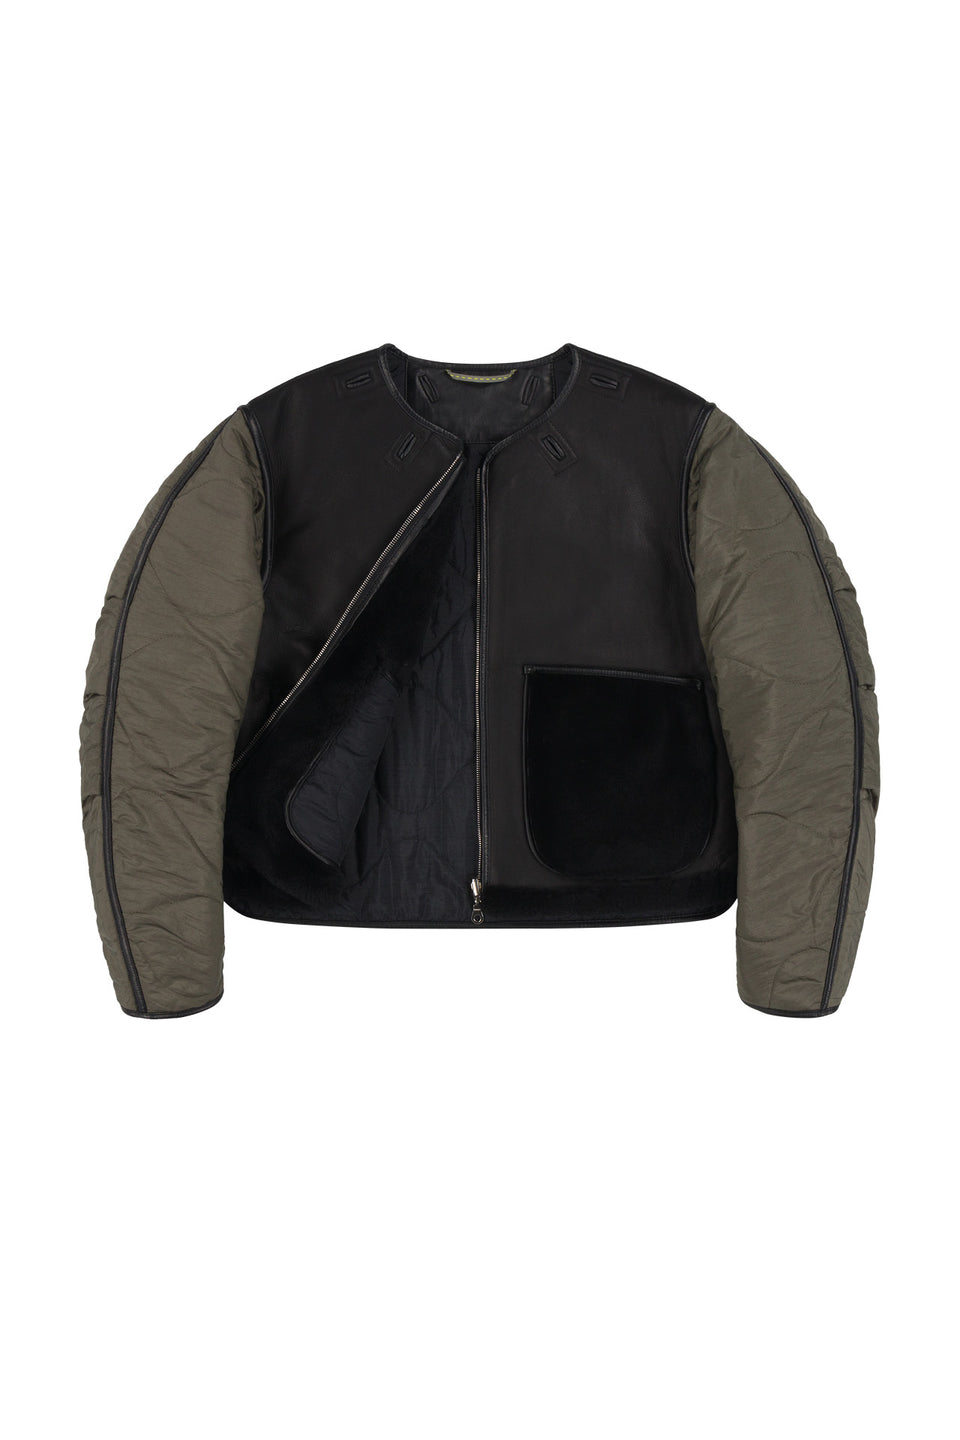 Shearling Cropped Aviator Quilt Jacket - Black / Black (listing page thumbnail)